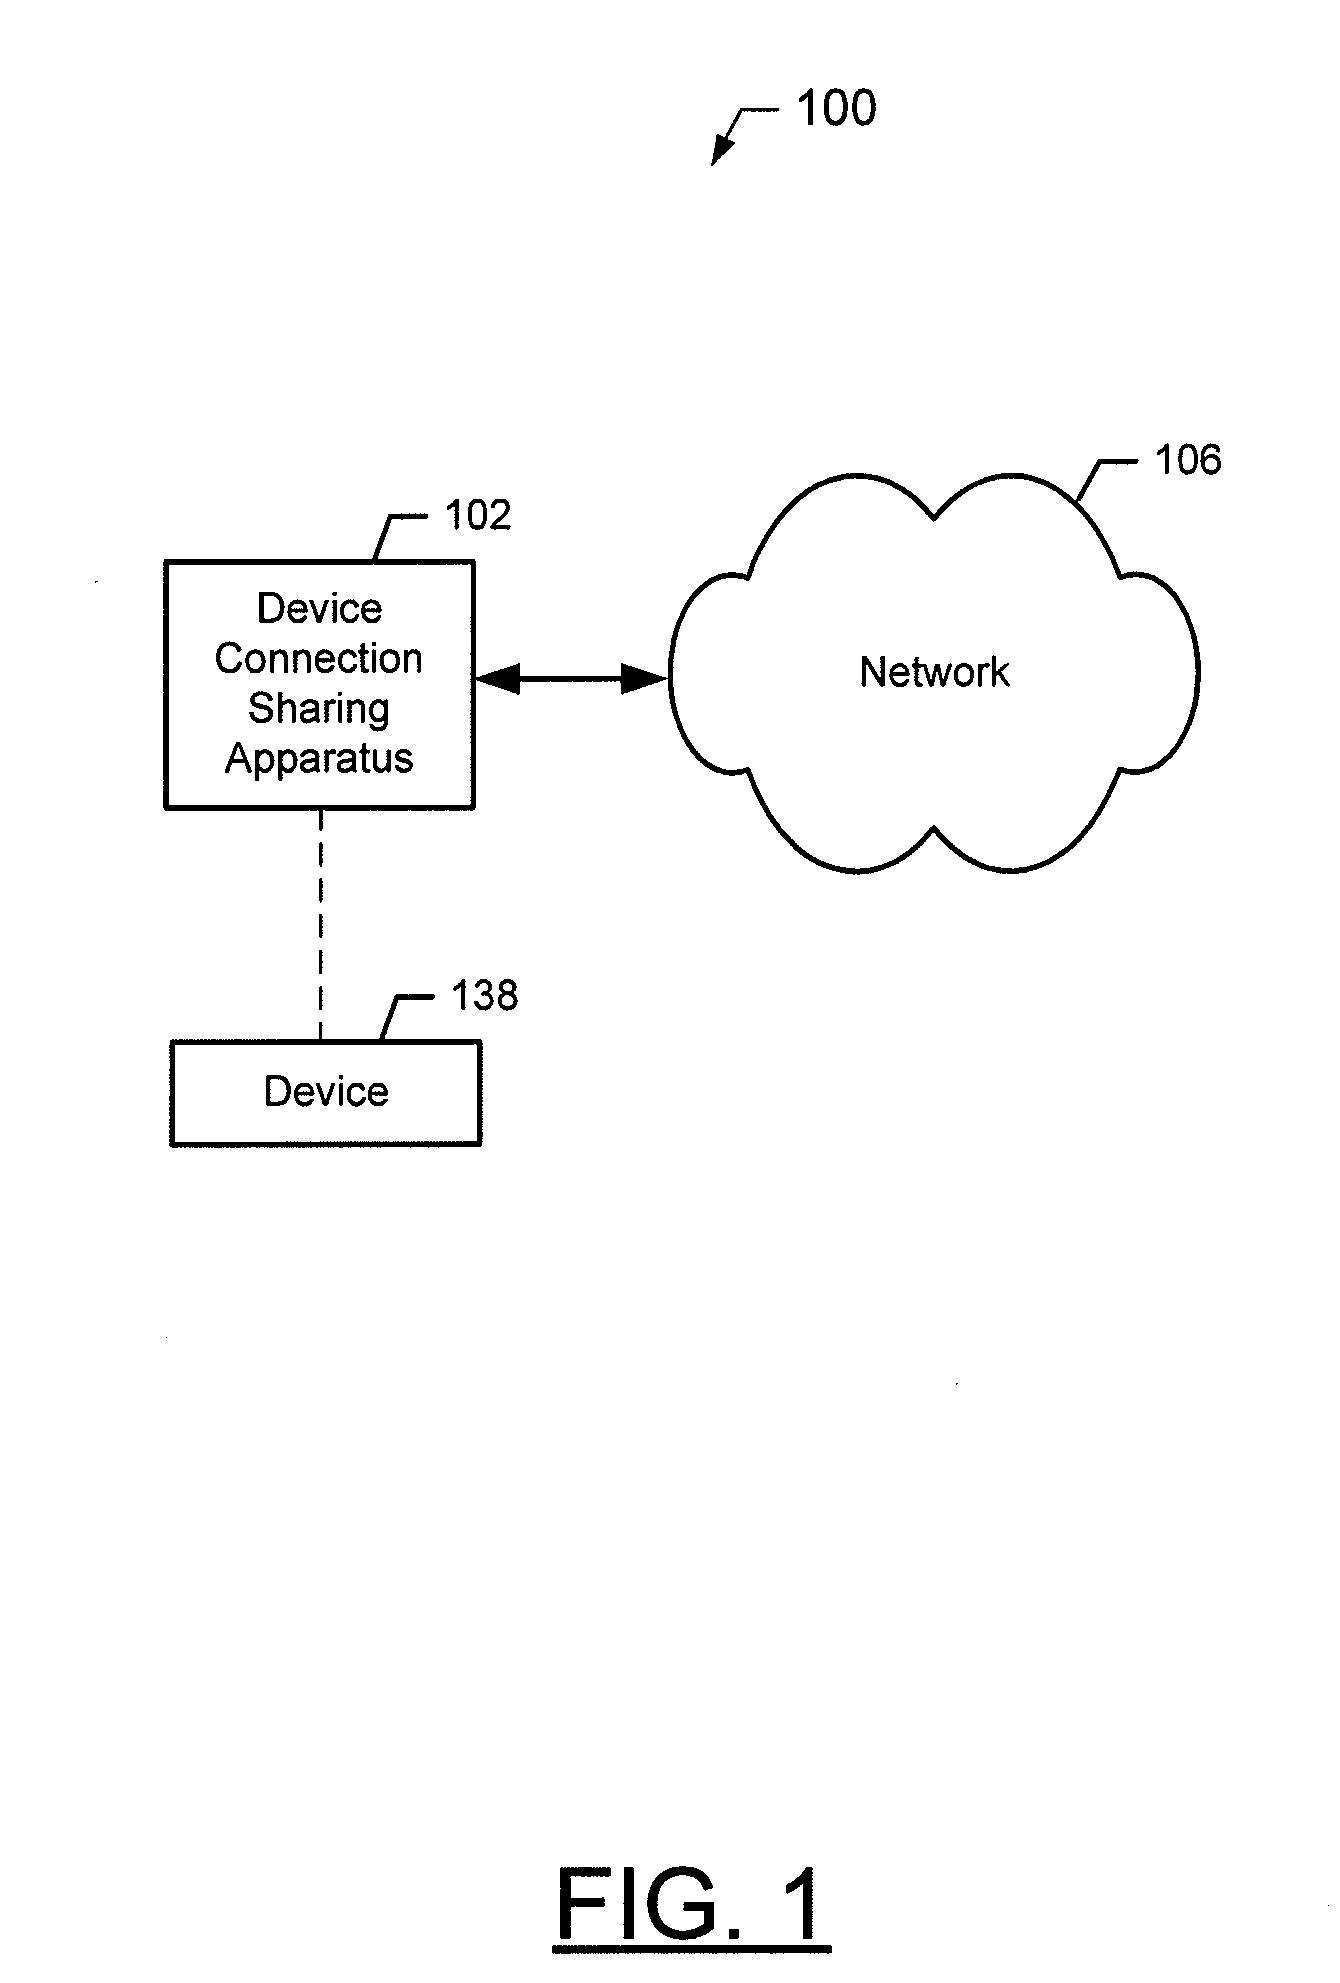 Methods and apparatuses for facilitating sharing device connections